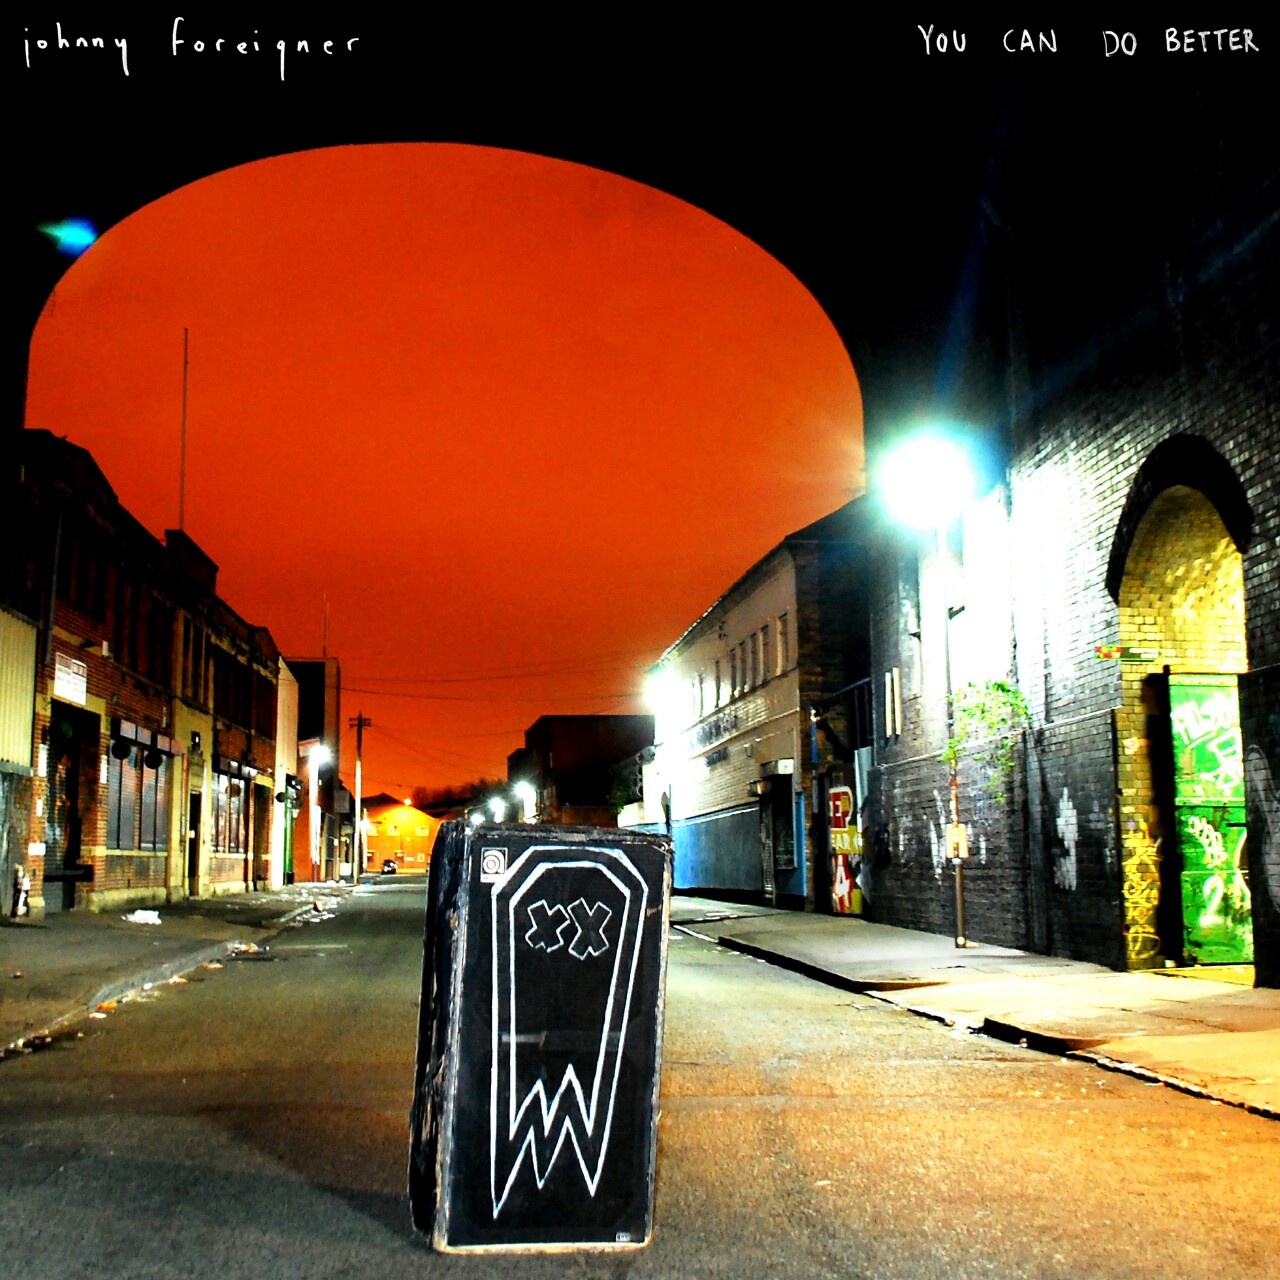 News Added Jan 19, 2014 "You Can Do Better" is Johnny Foreigner's fourth studio album. It will be released on 10 March 2014 via Alcopop! Records on CD and 12”. Submitted By Abu-Dun Track list: Added Jan 19, 2014 1 Shipping 2 Le Sigh 3 In Capitals 4 Riff Glitchard 5 The Last Queens of […]